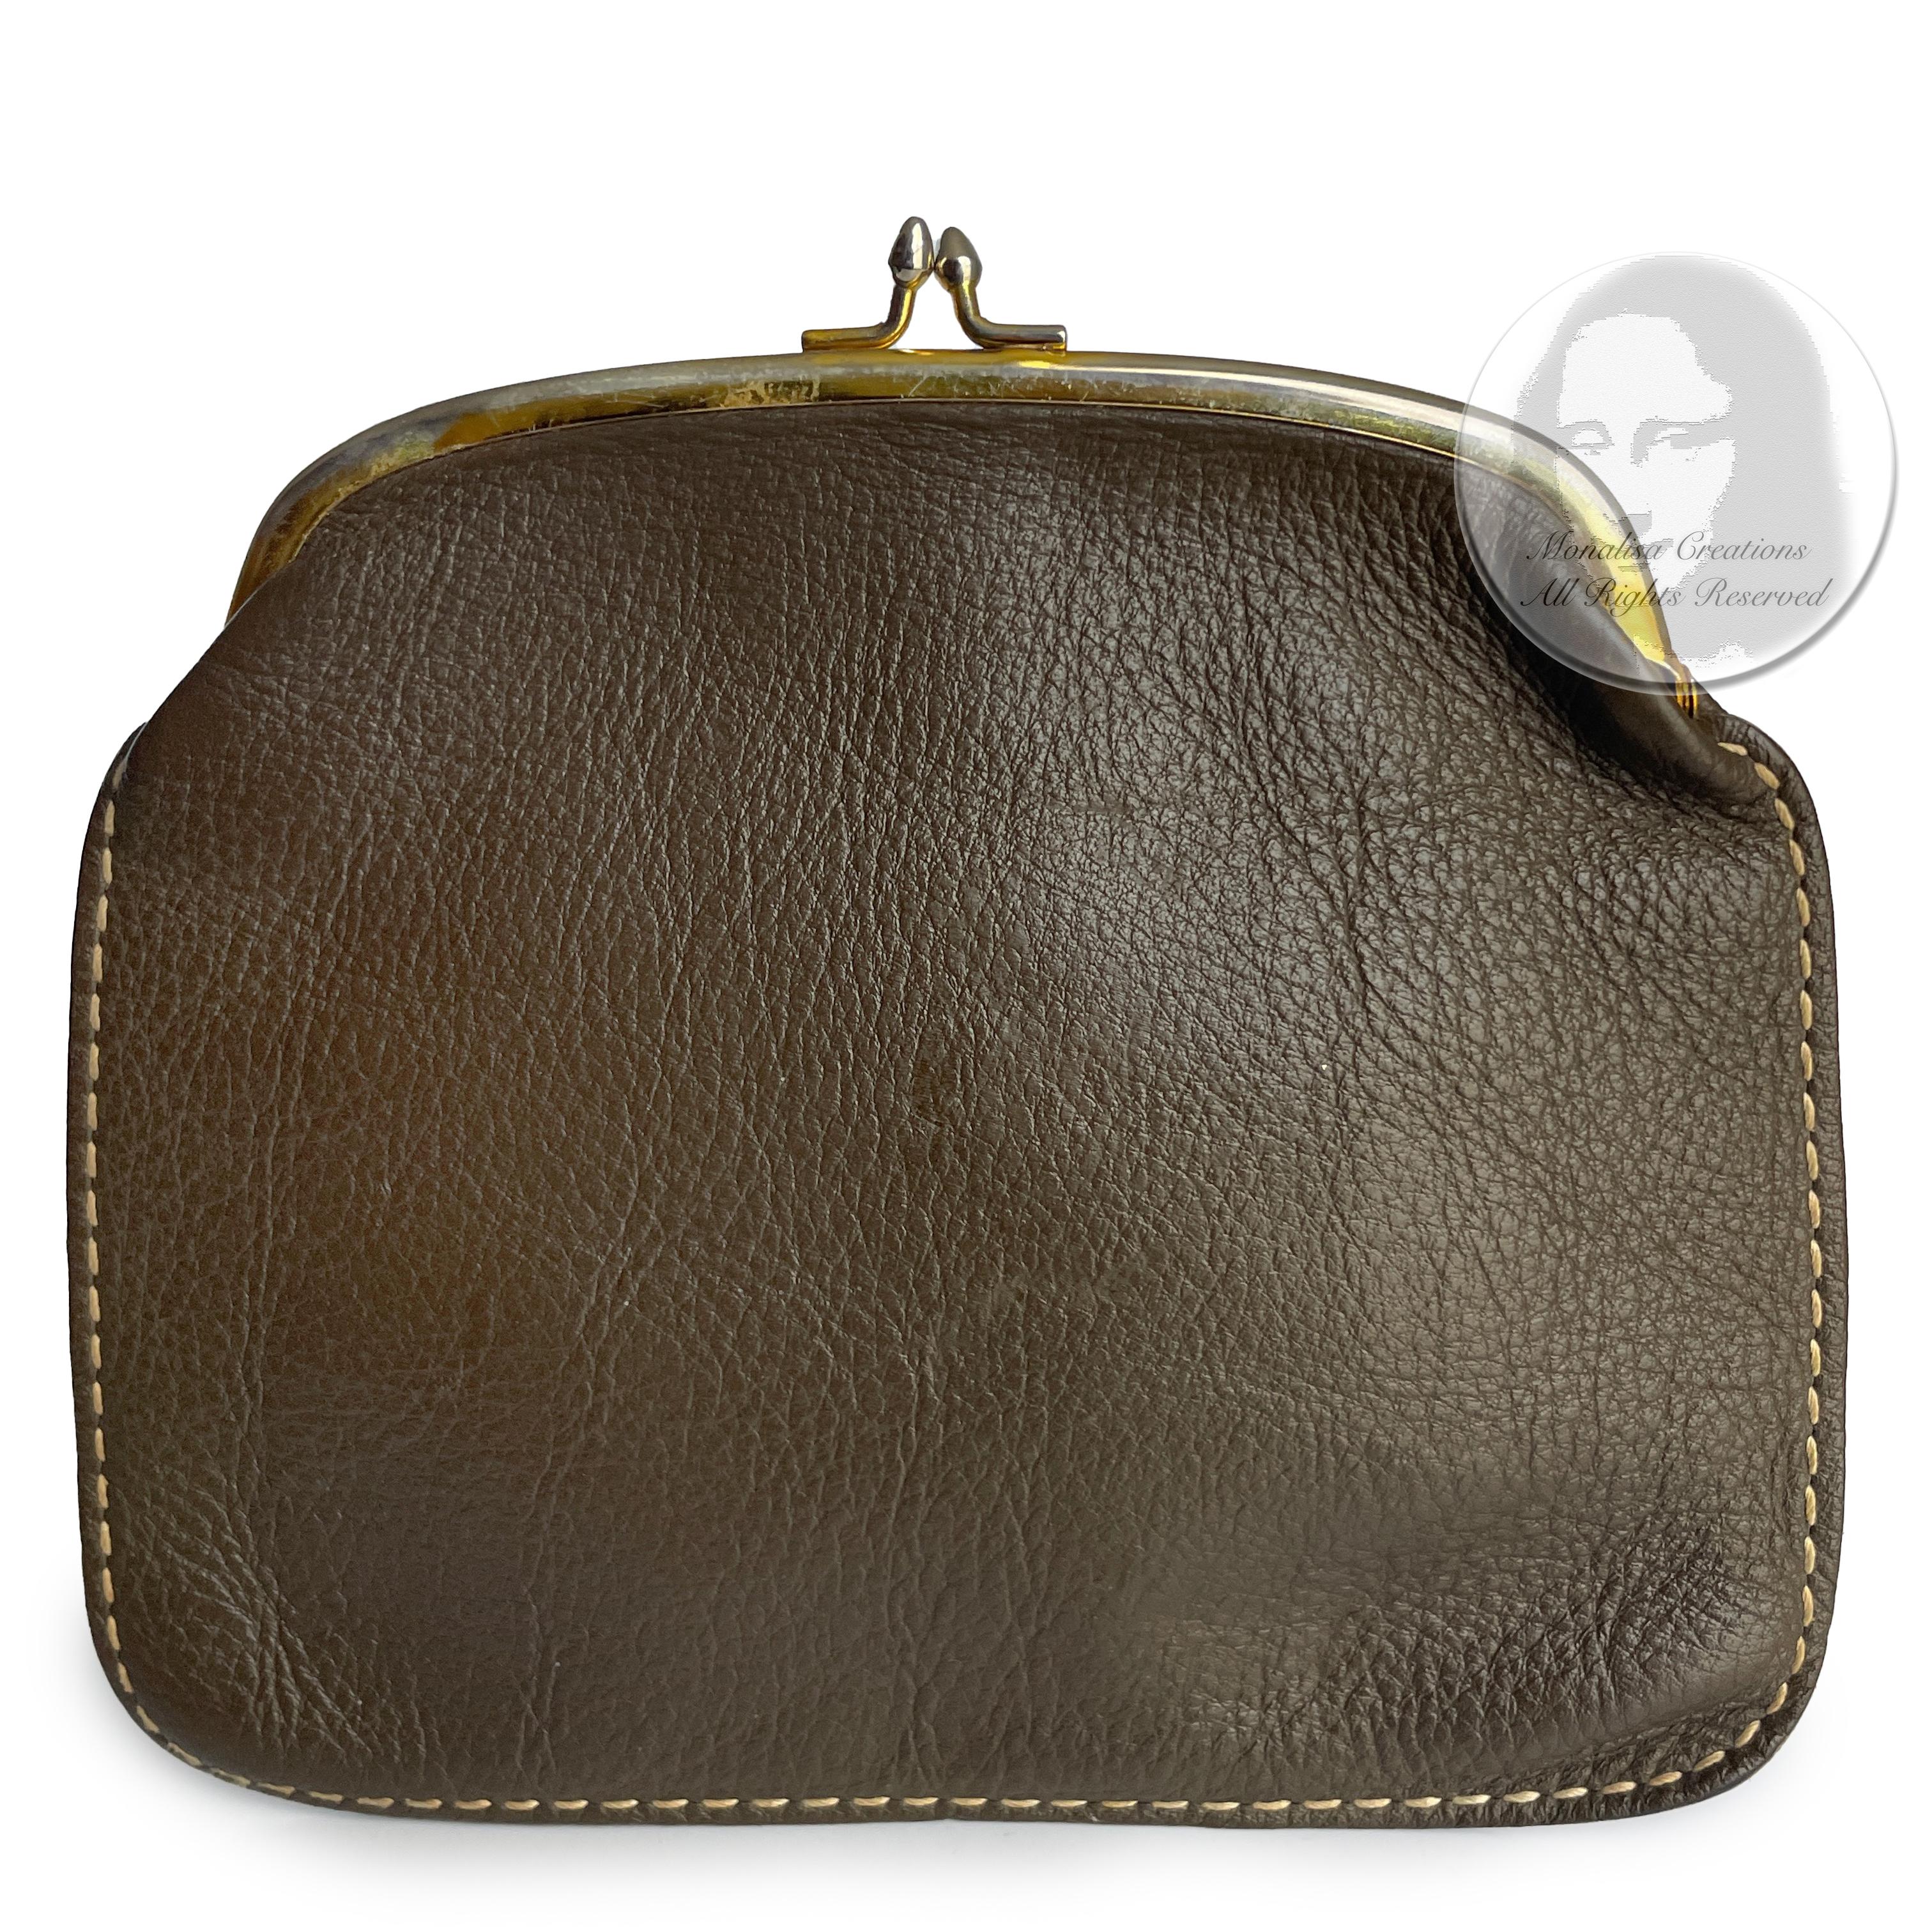 Bonnie Cashin for Coach 'foldover purse' or clutch bag, part of Bonnie's Cashin Carry accessories collection and likely made in the late 1960s.  Made from olive hued brown leather with white contrast exterior stitching, this unique little bag